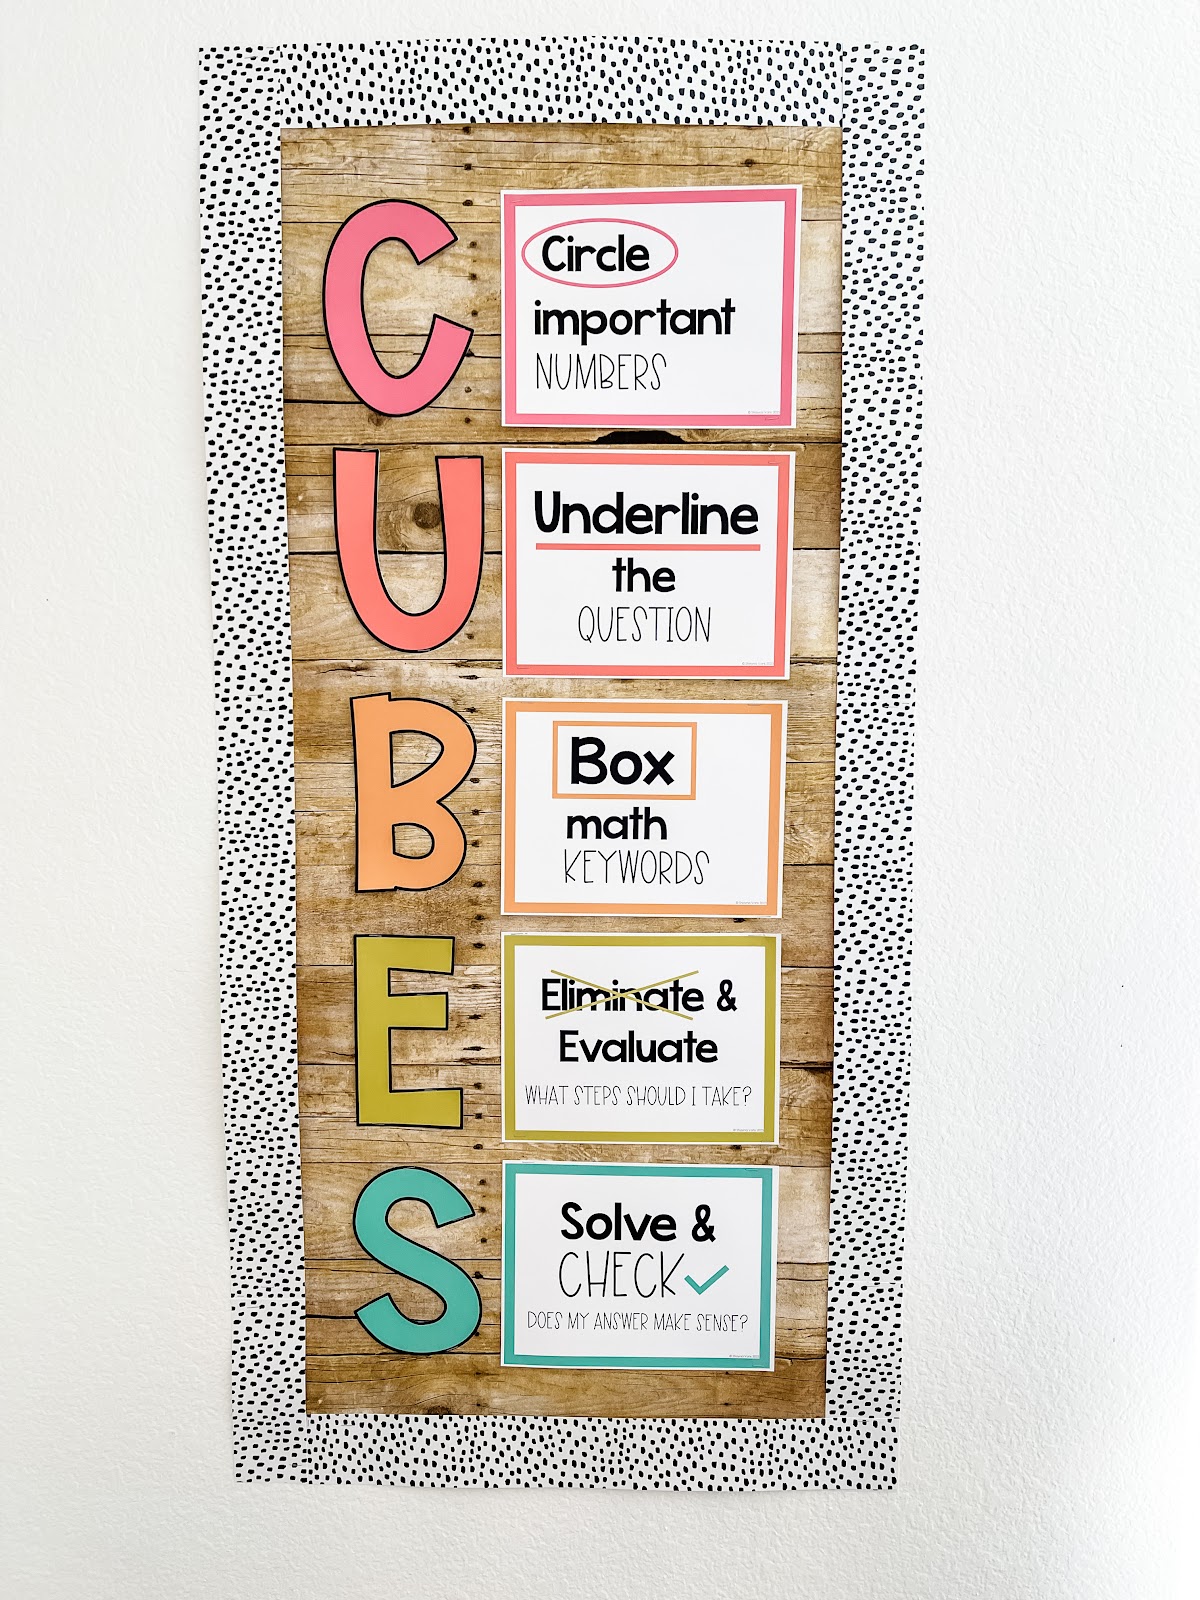 This image shows a display with the CUBES strategy sown. The letters CUBES are displayed vertically with a box by each letter describing the strategy. 